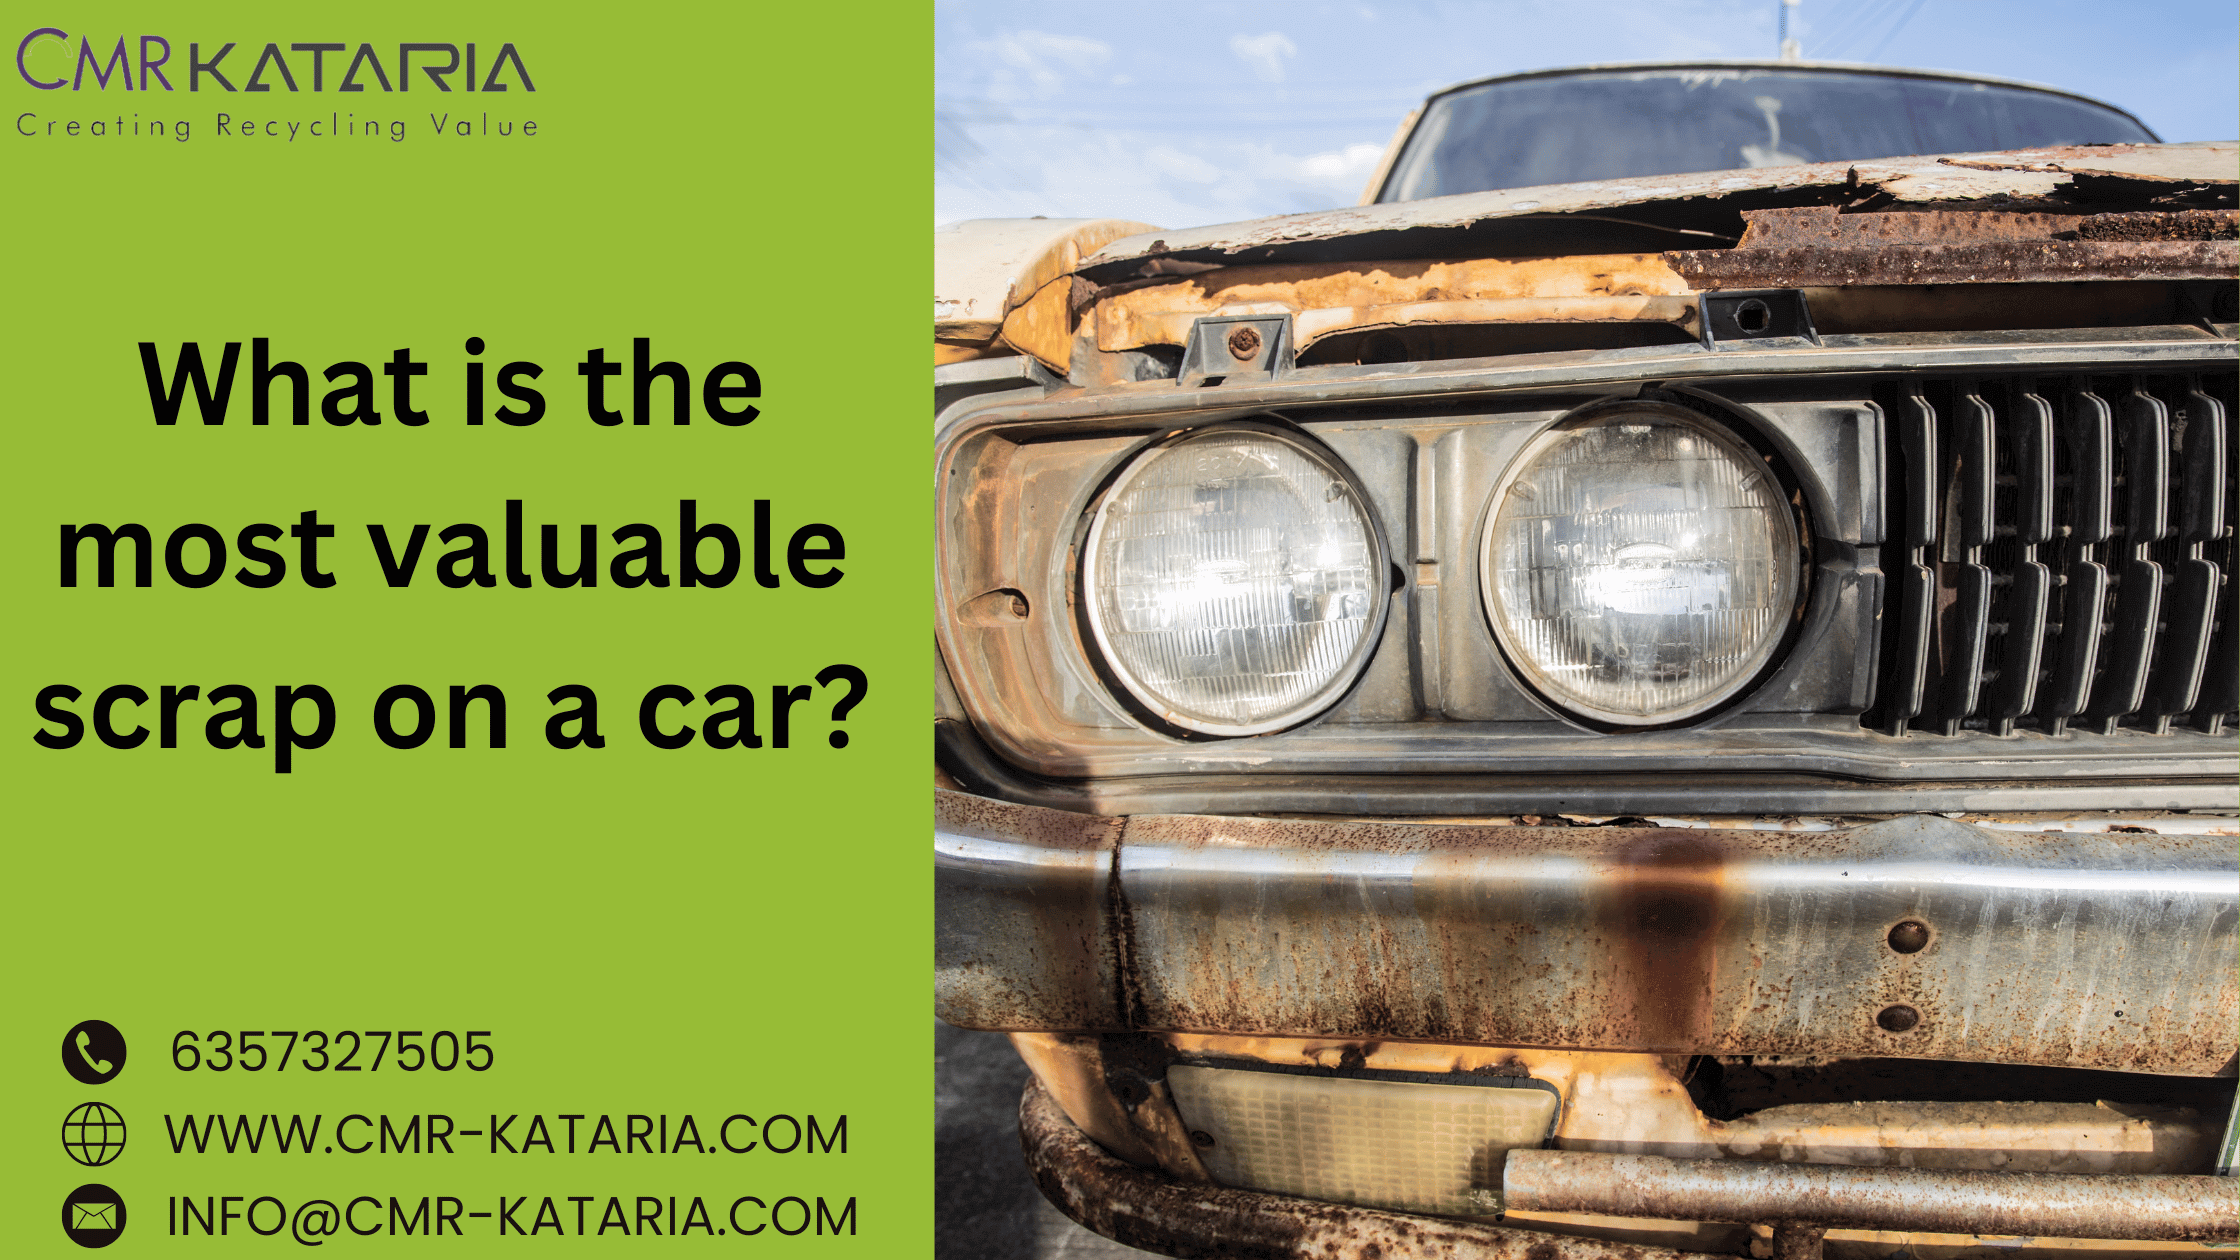 What is the most valuable scrap on a car?